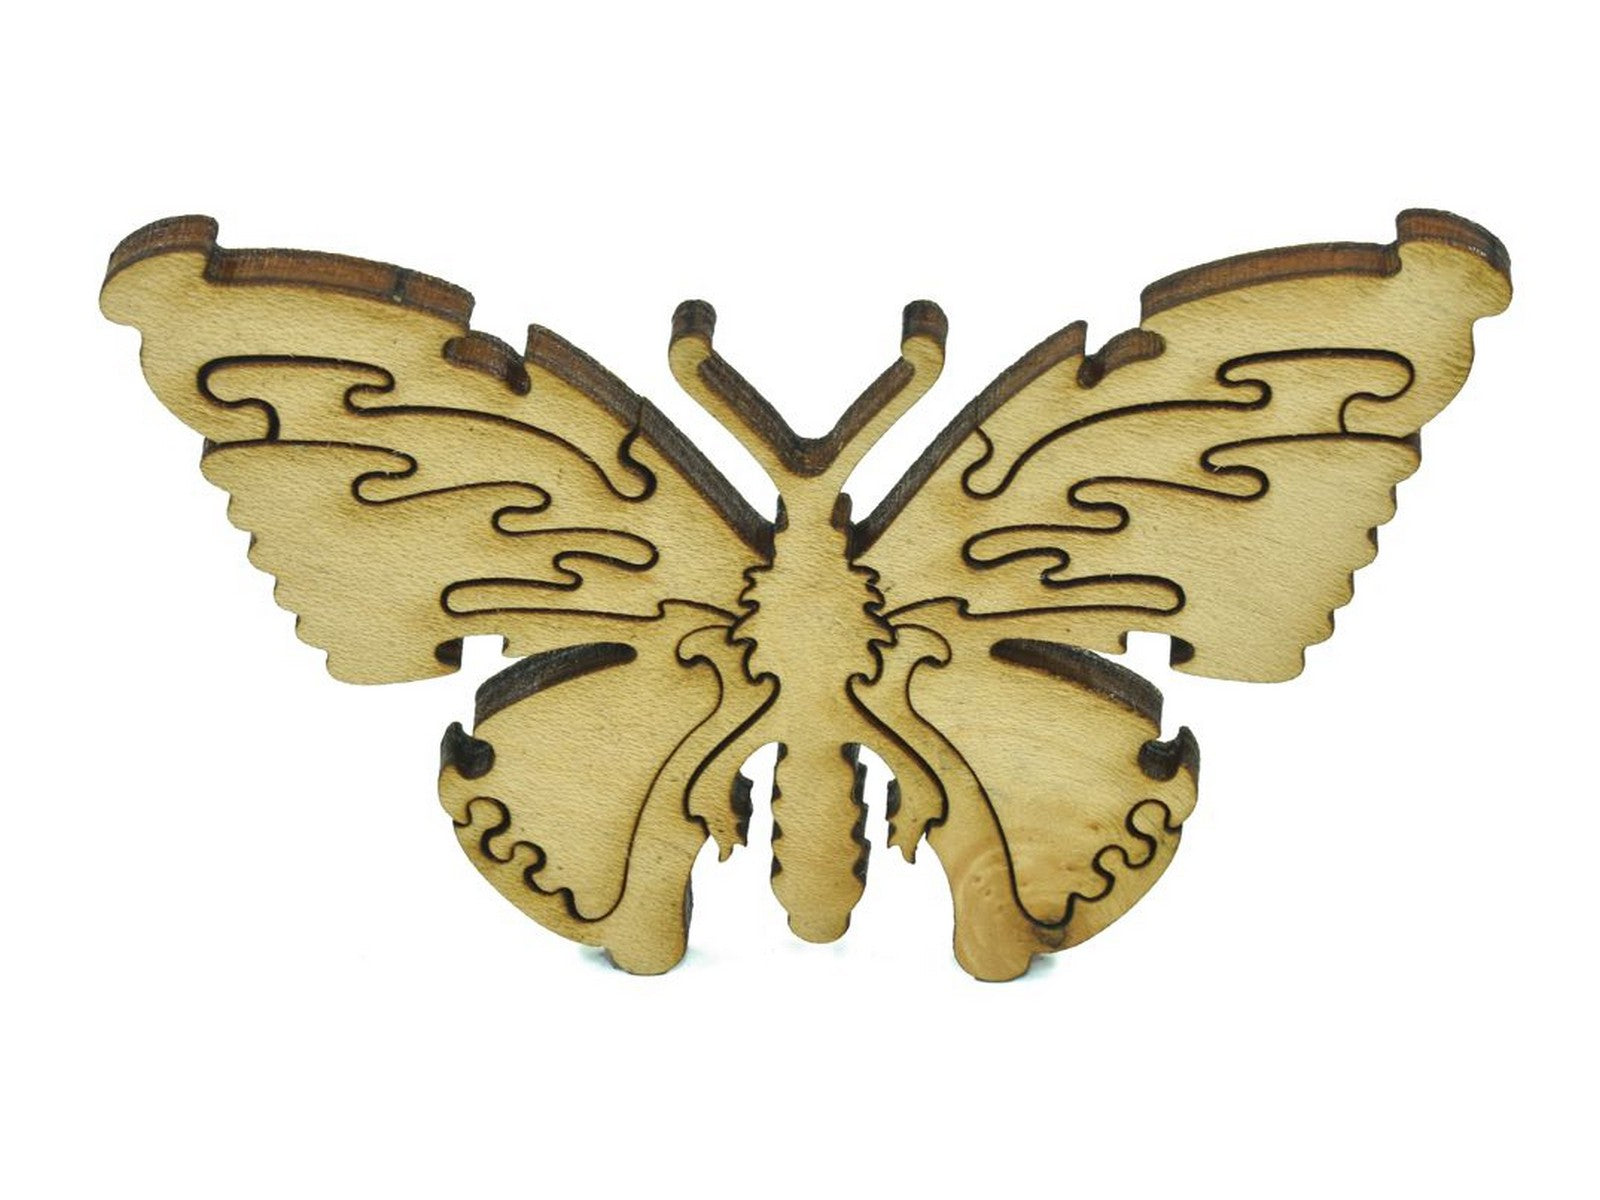 A closeup of pieces in the shape of a butterfly.